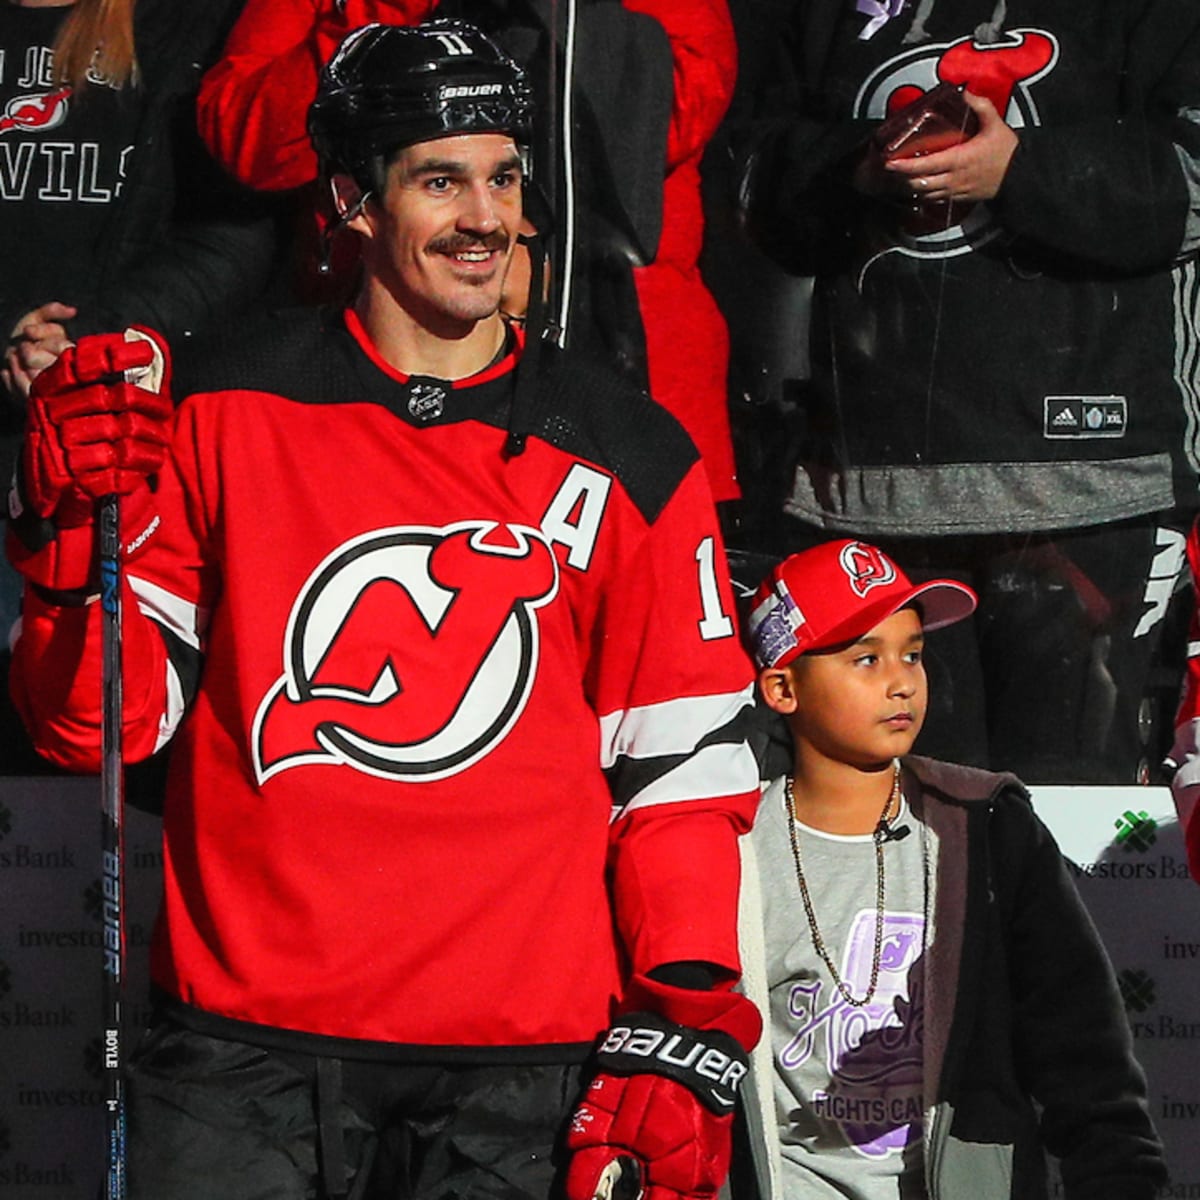 New Jersey Devils - It's Hockey Fights Cancer Night!